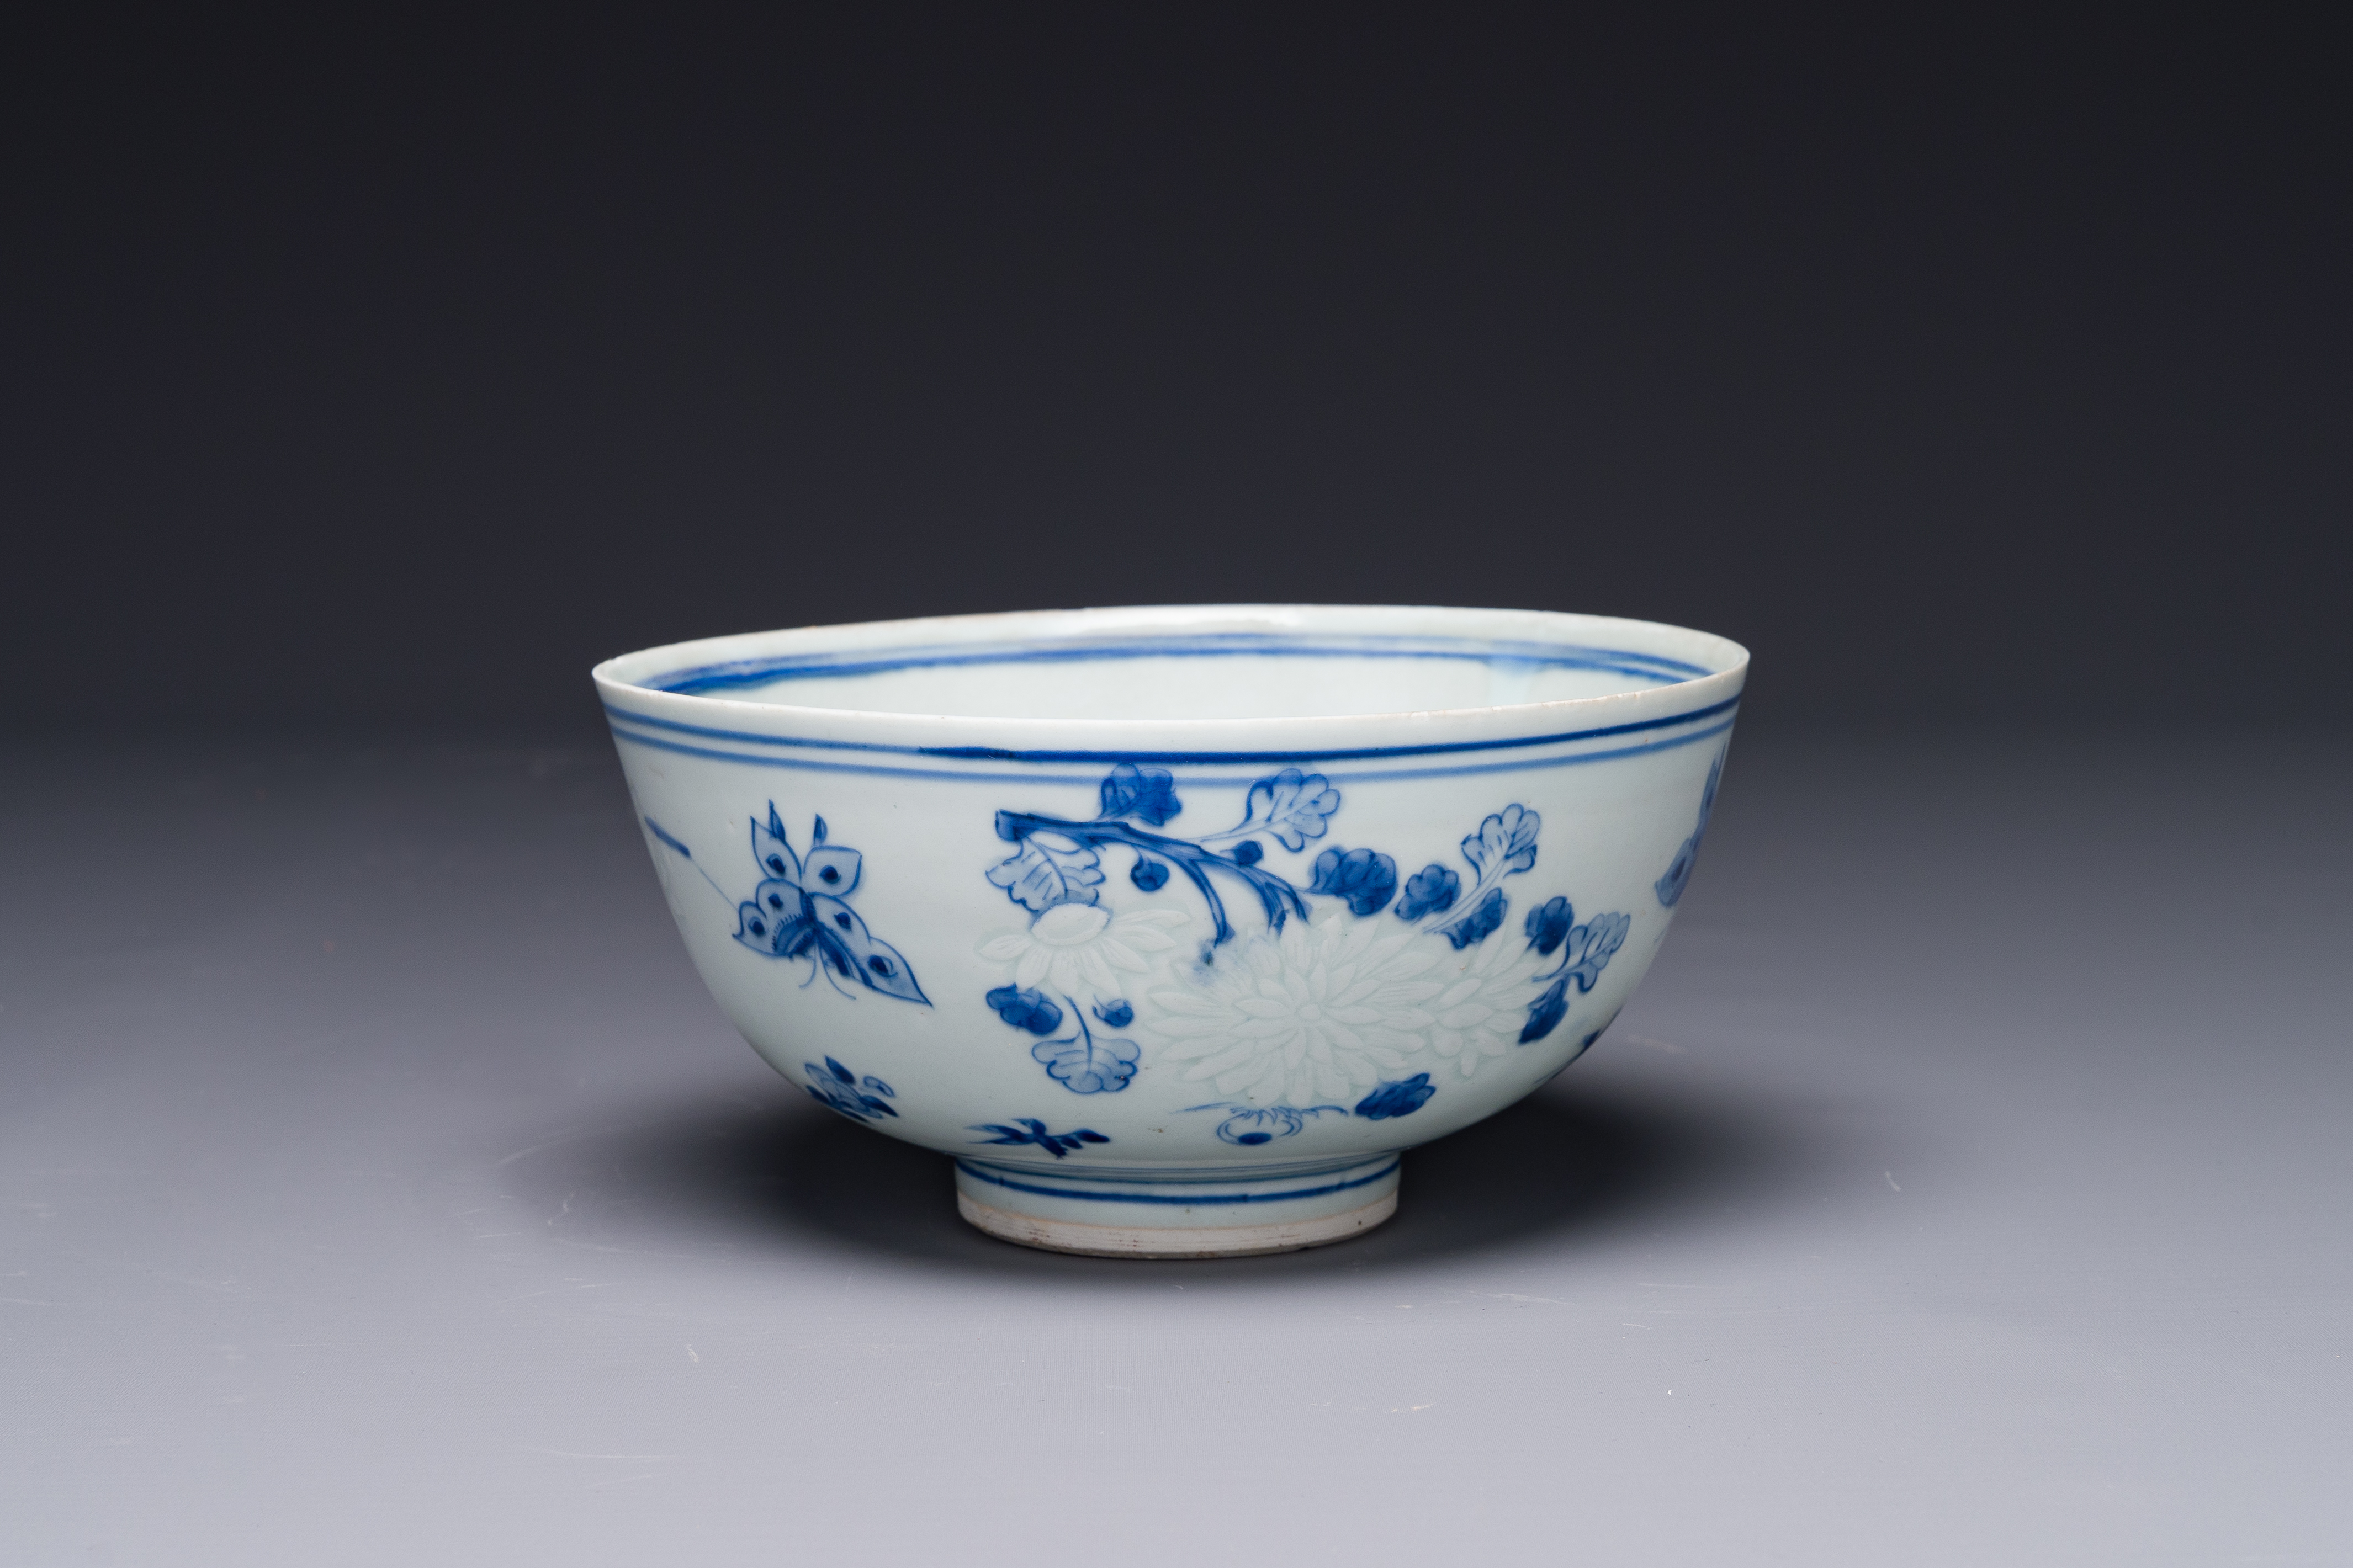 A Chinese blue and white 'Hatcher cargo' bowl with floral design, Transitional period - Image 3 of 5